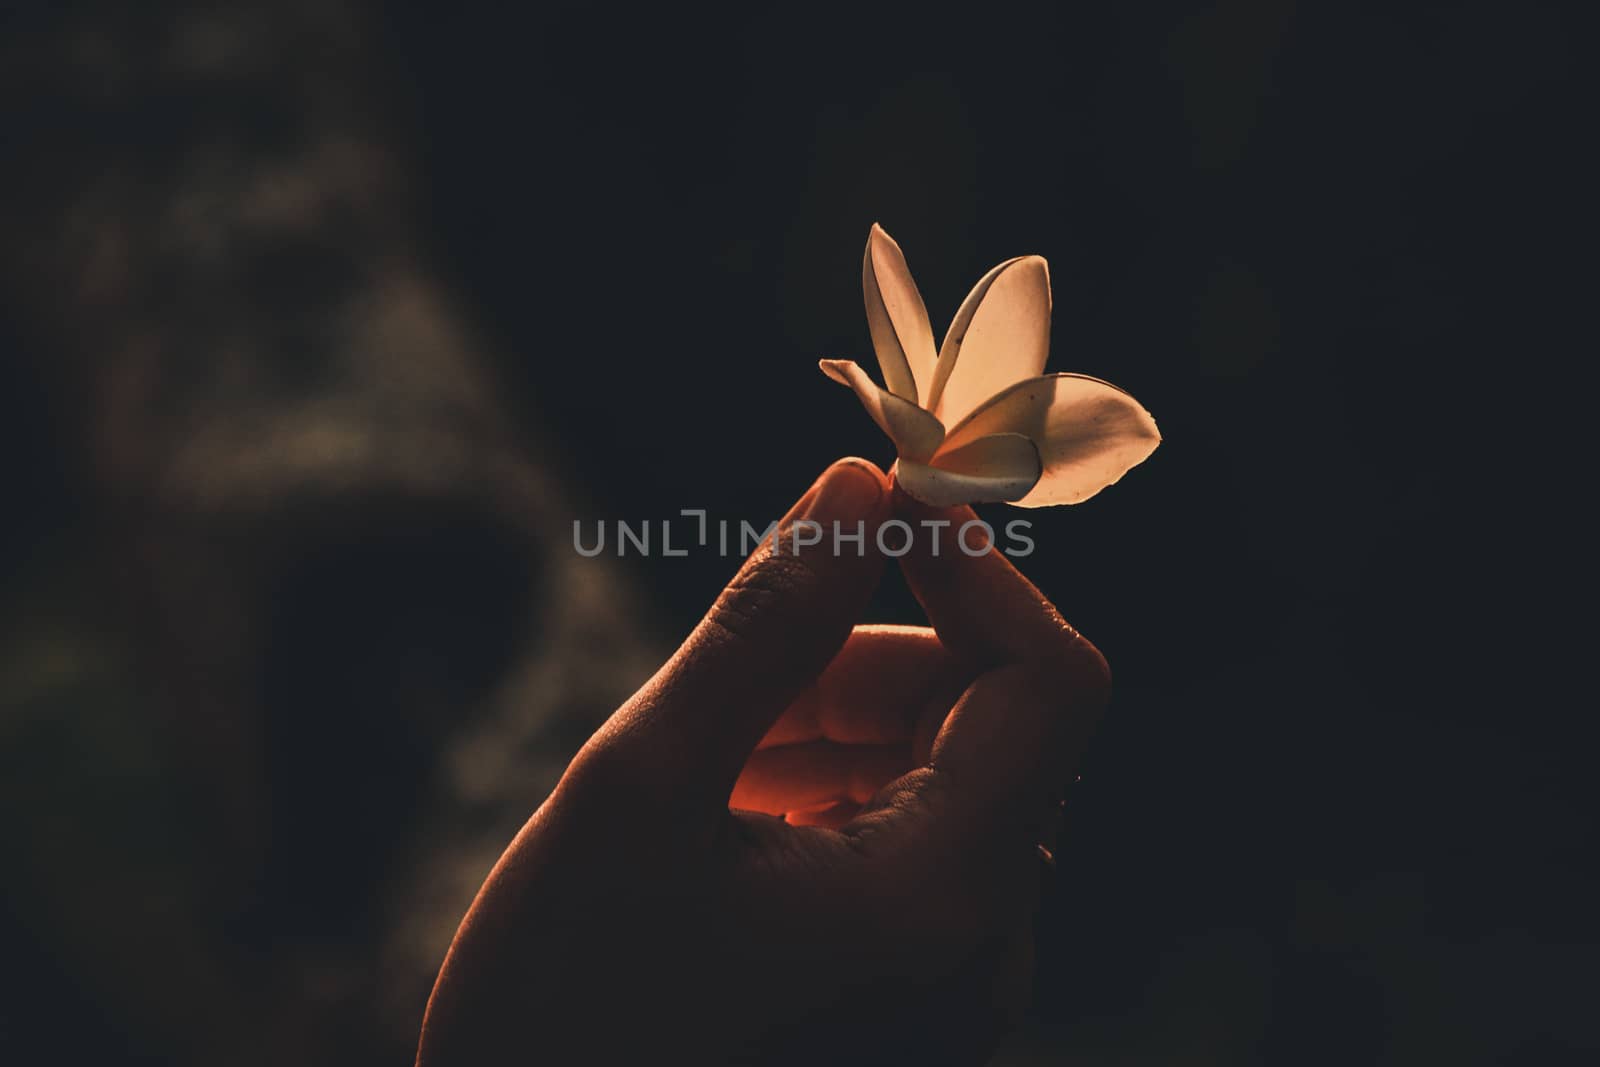 Holding a flower up to the light by Sonnet15